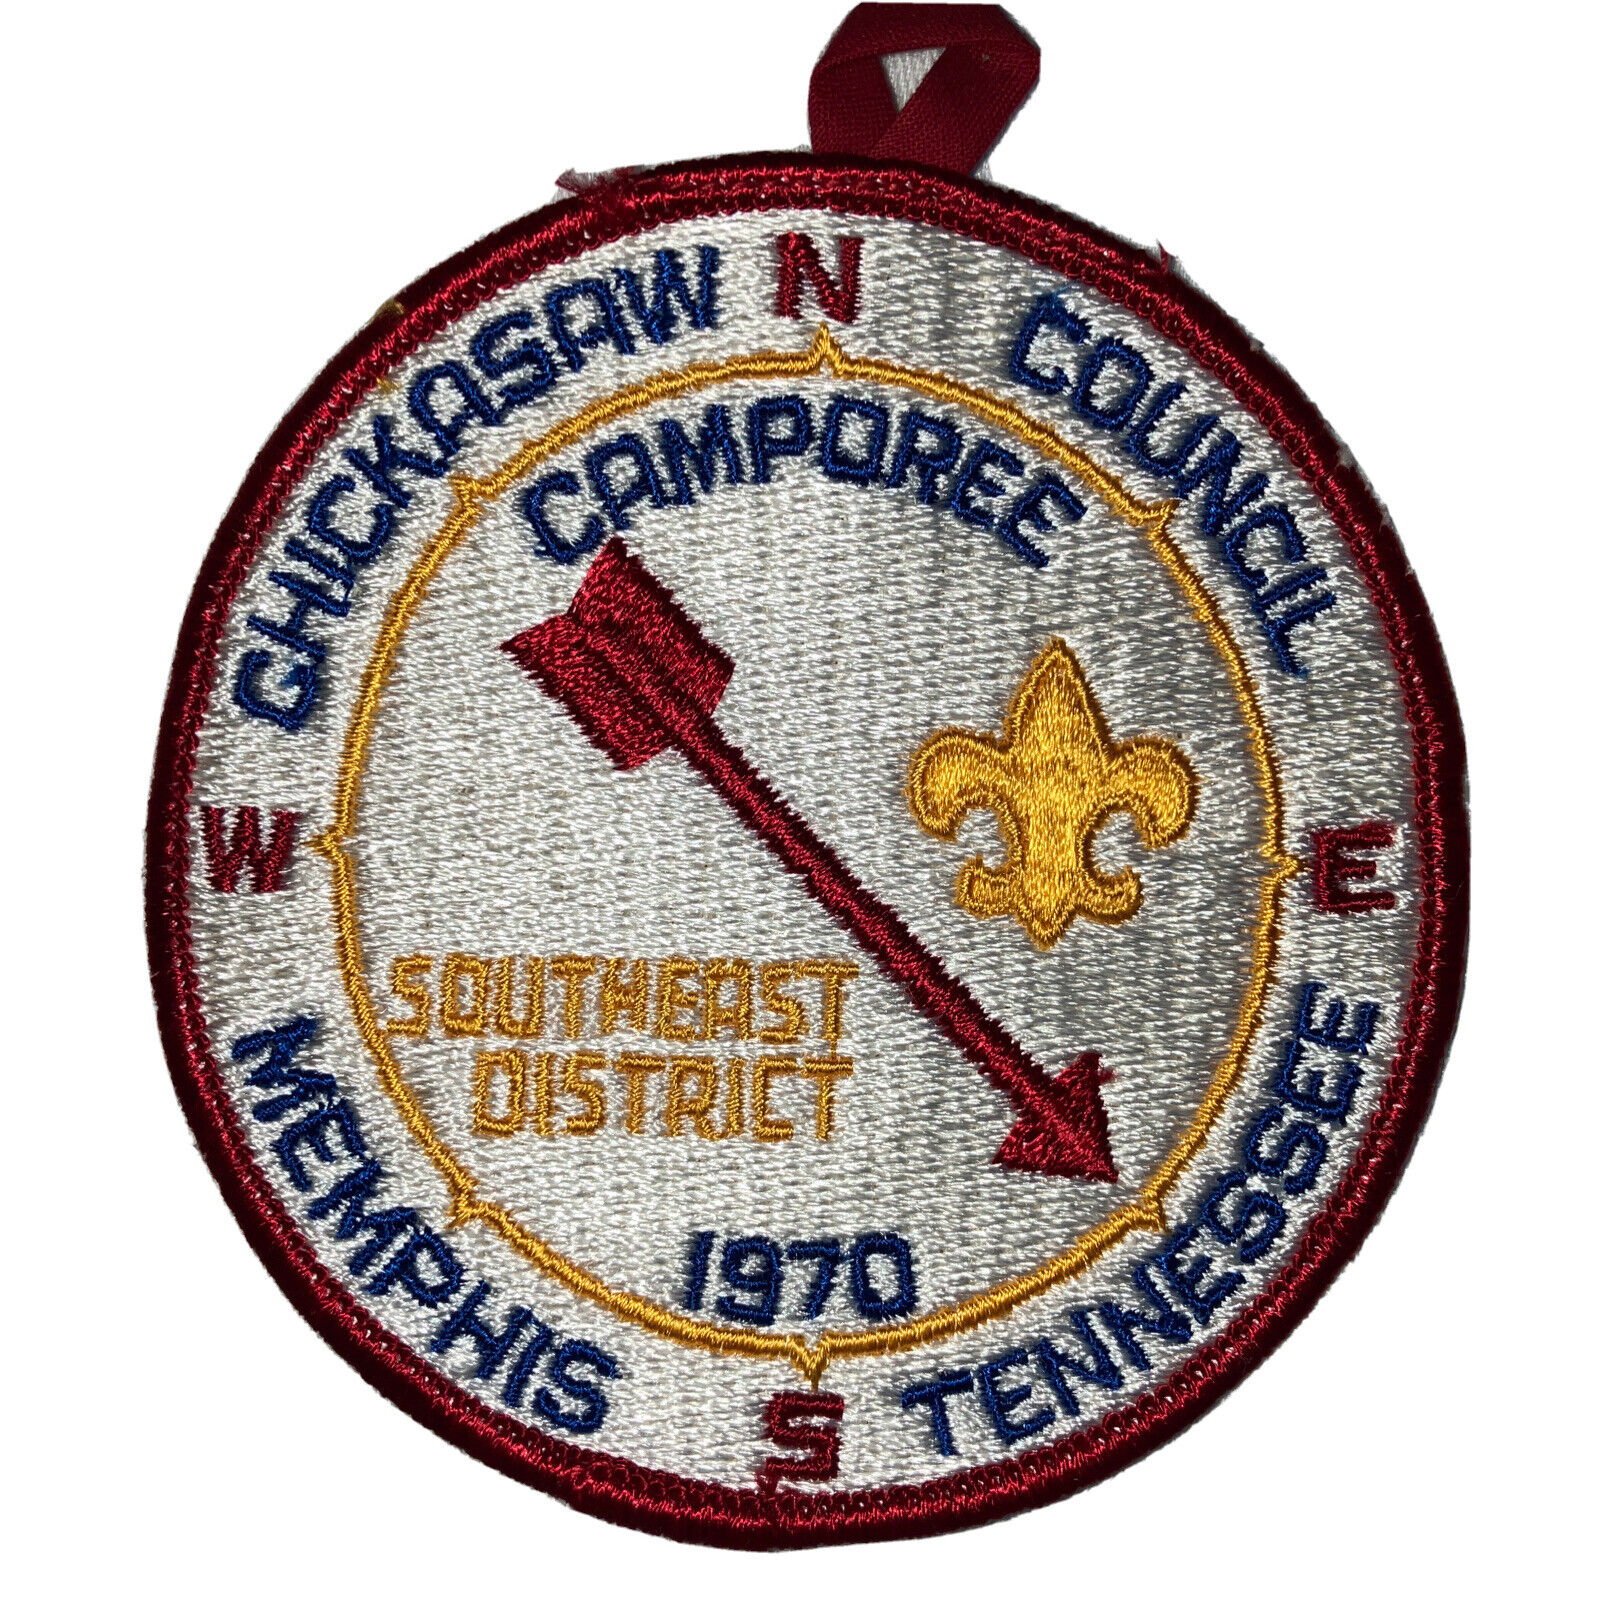 1970 Chickasaw Council Camporee Southeast Dist Embroidery Patch Boy Scout BSA